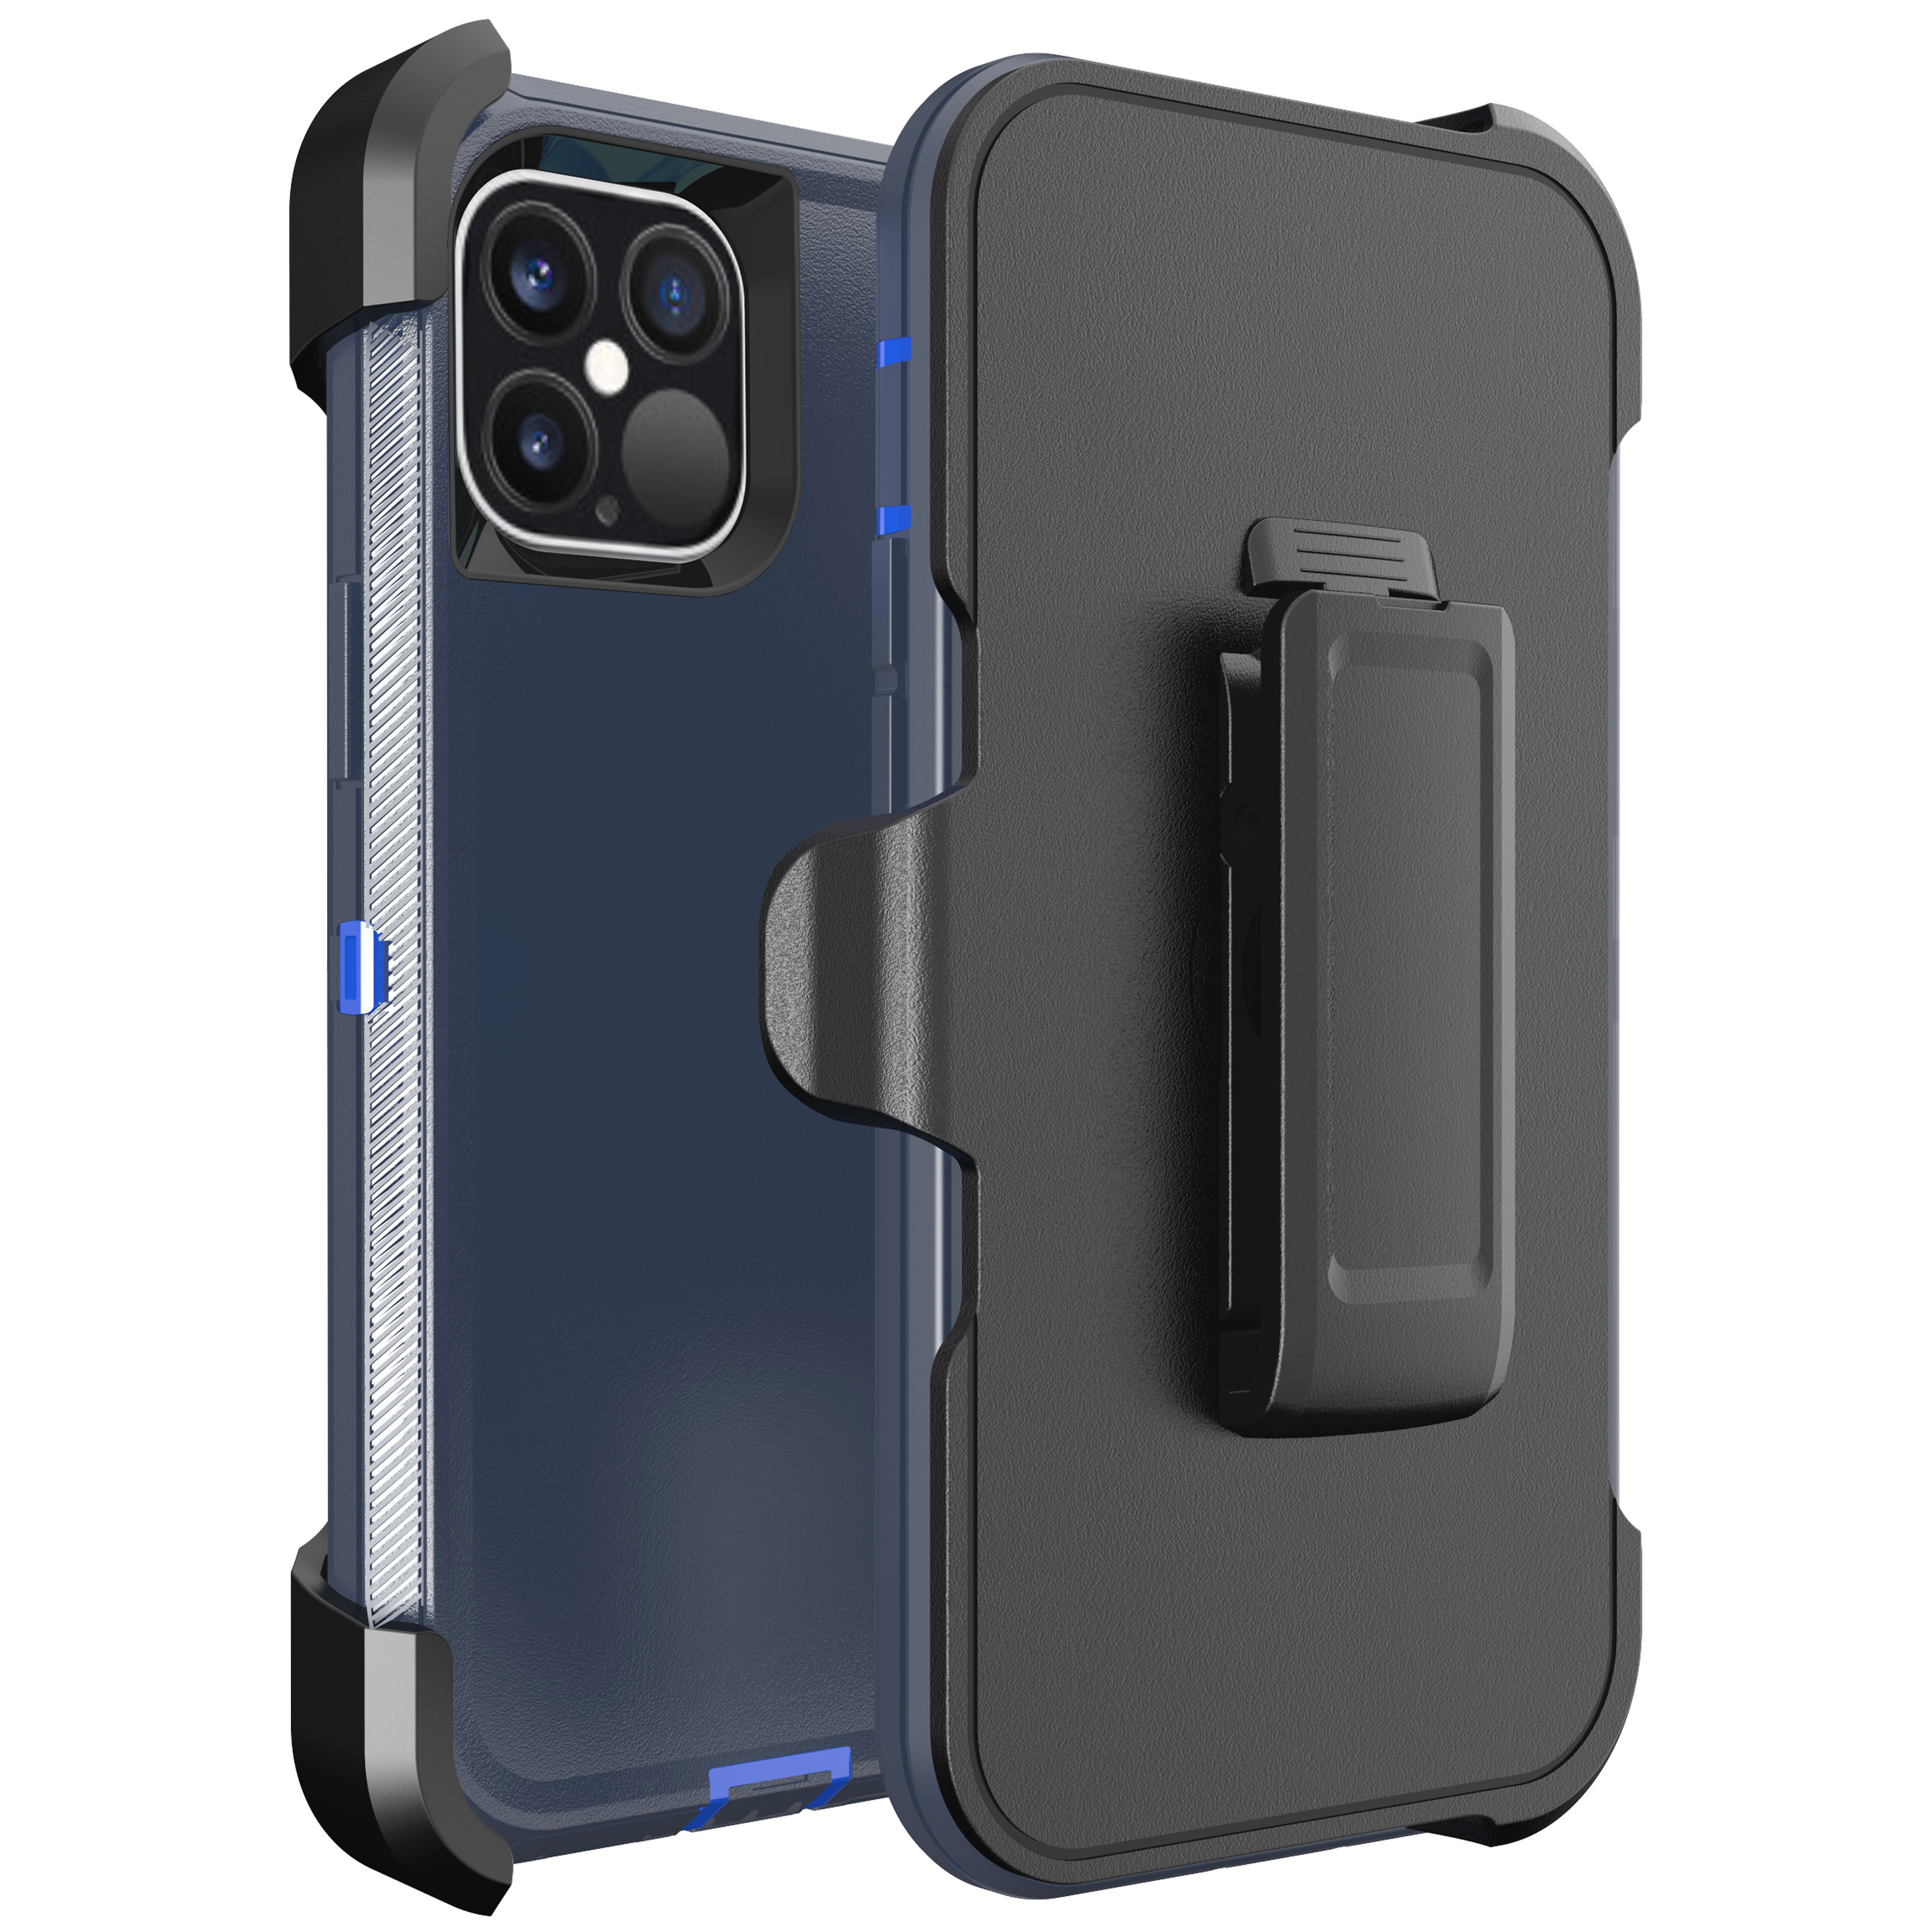 Armor Robot Case With Clip for iPHONE 12 / 12 Pro 6.1 (Navy Blue - Black)